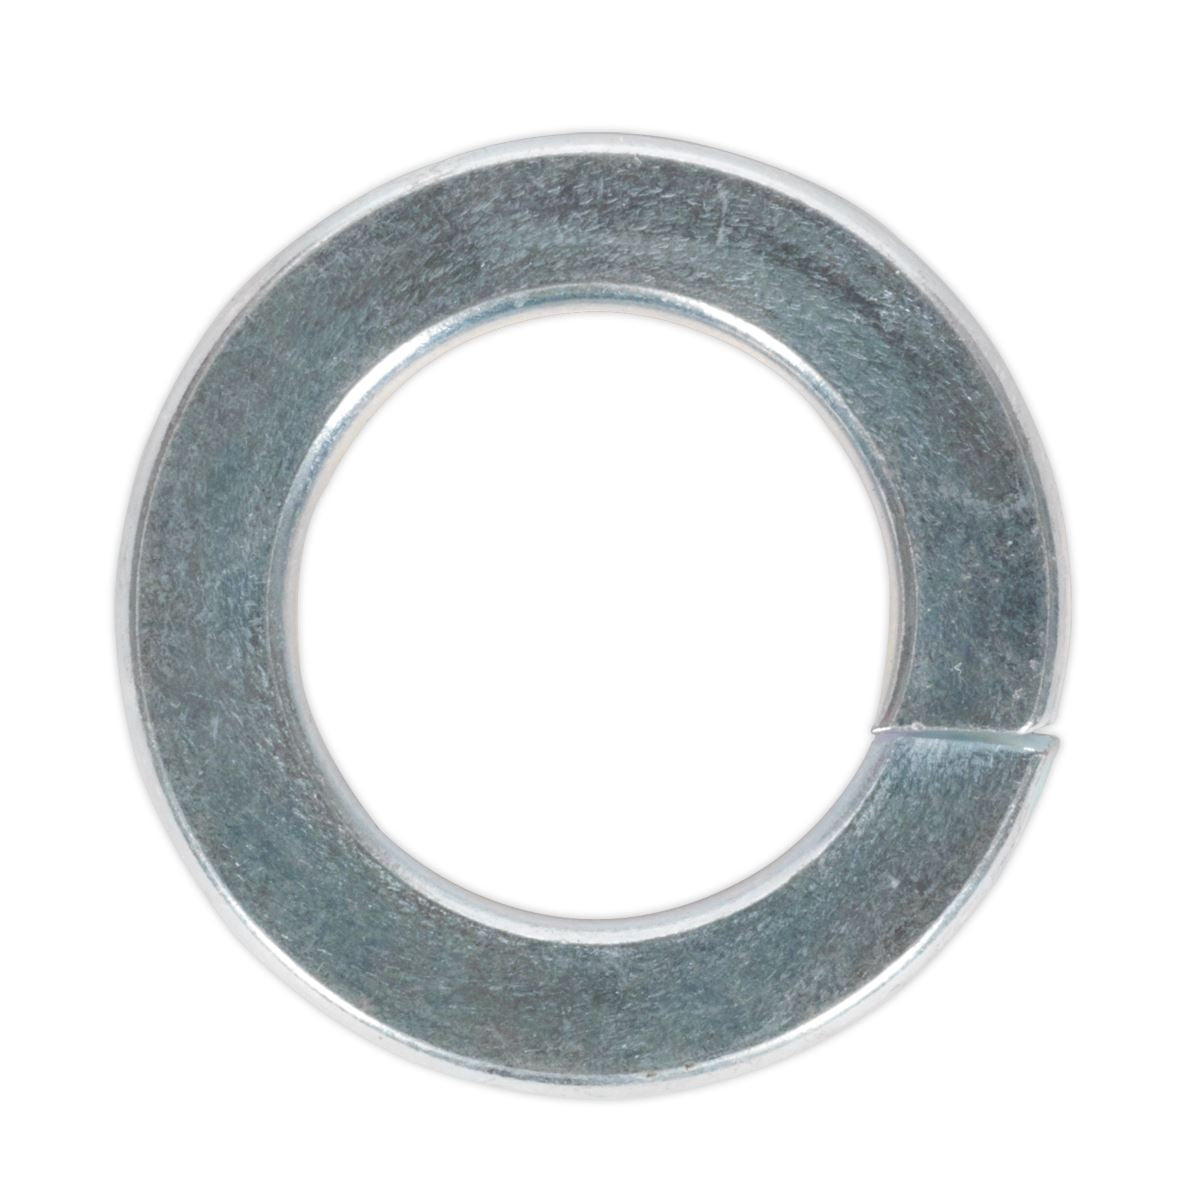 Sealey Spring Washer DIN 127B M16 Zinc Pack of 50